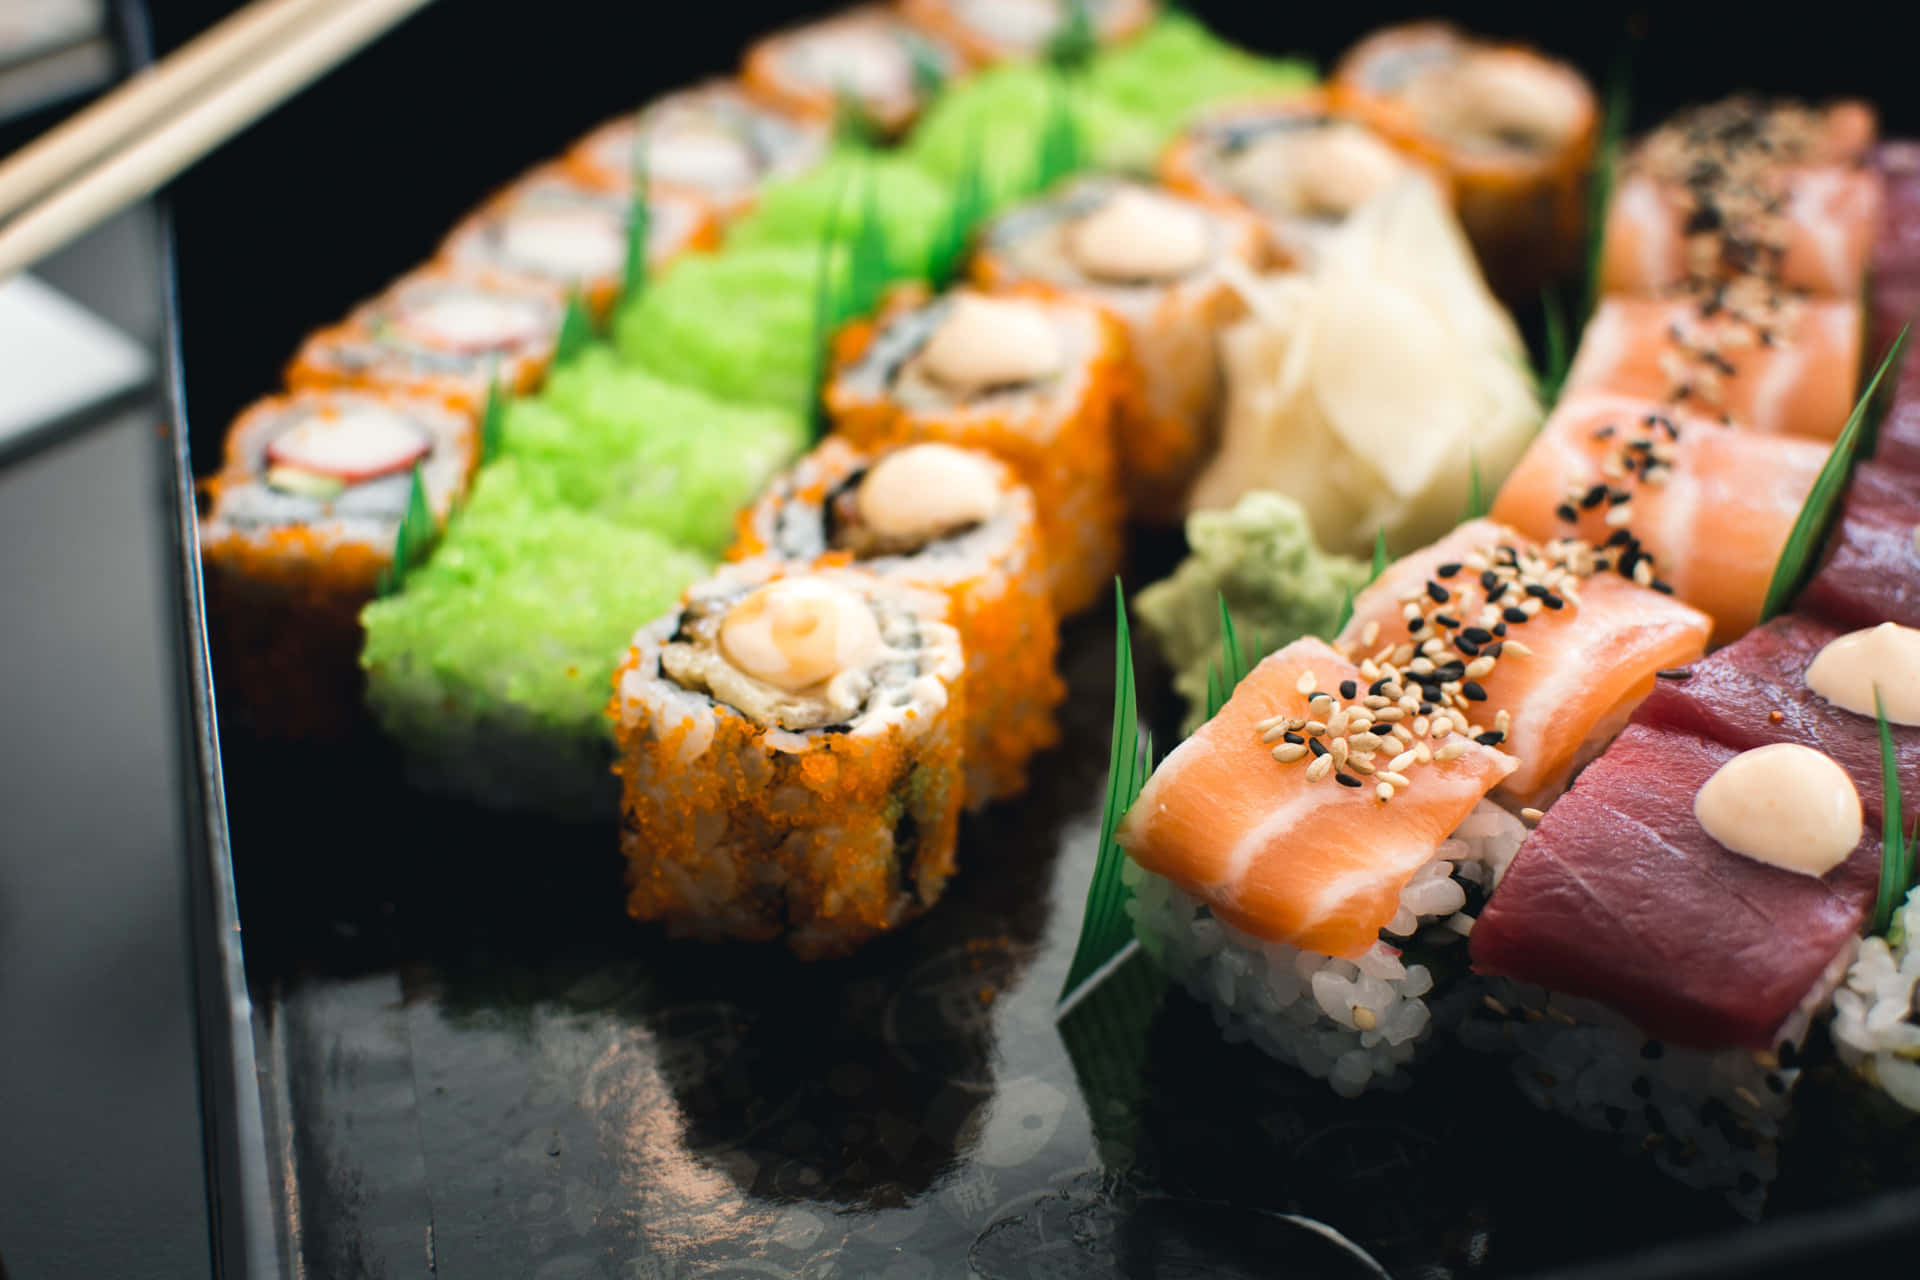 Enjoy fresh and deliciously crafted sushi